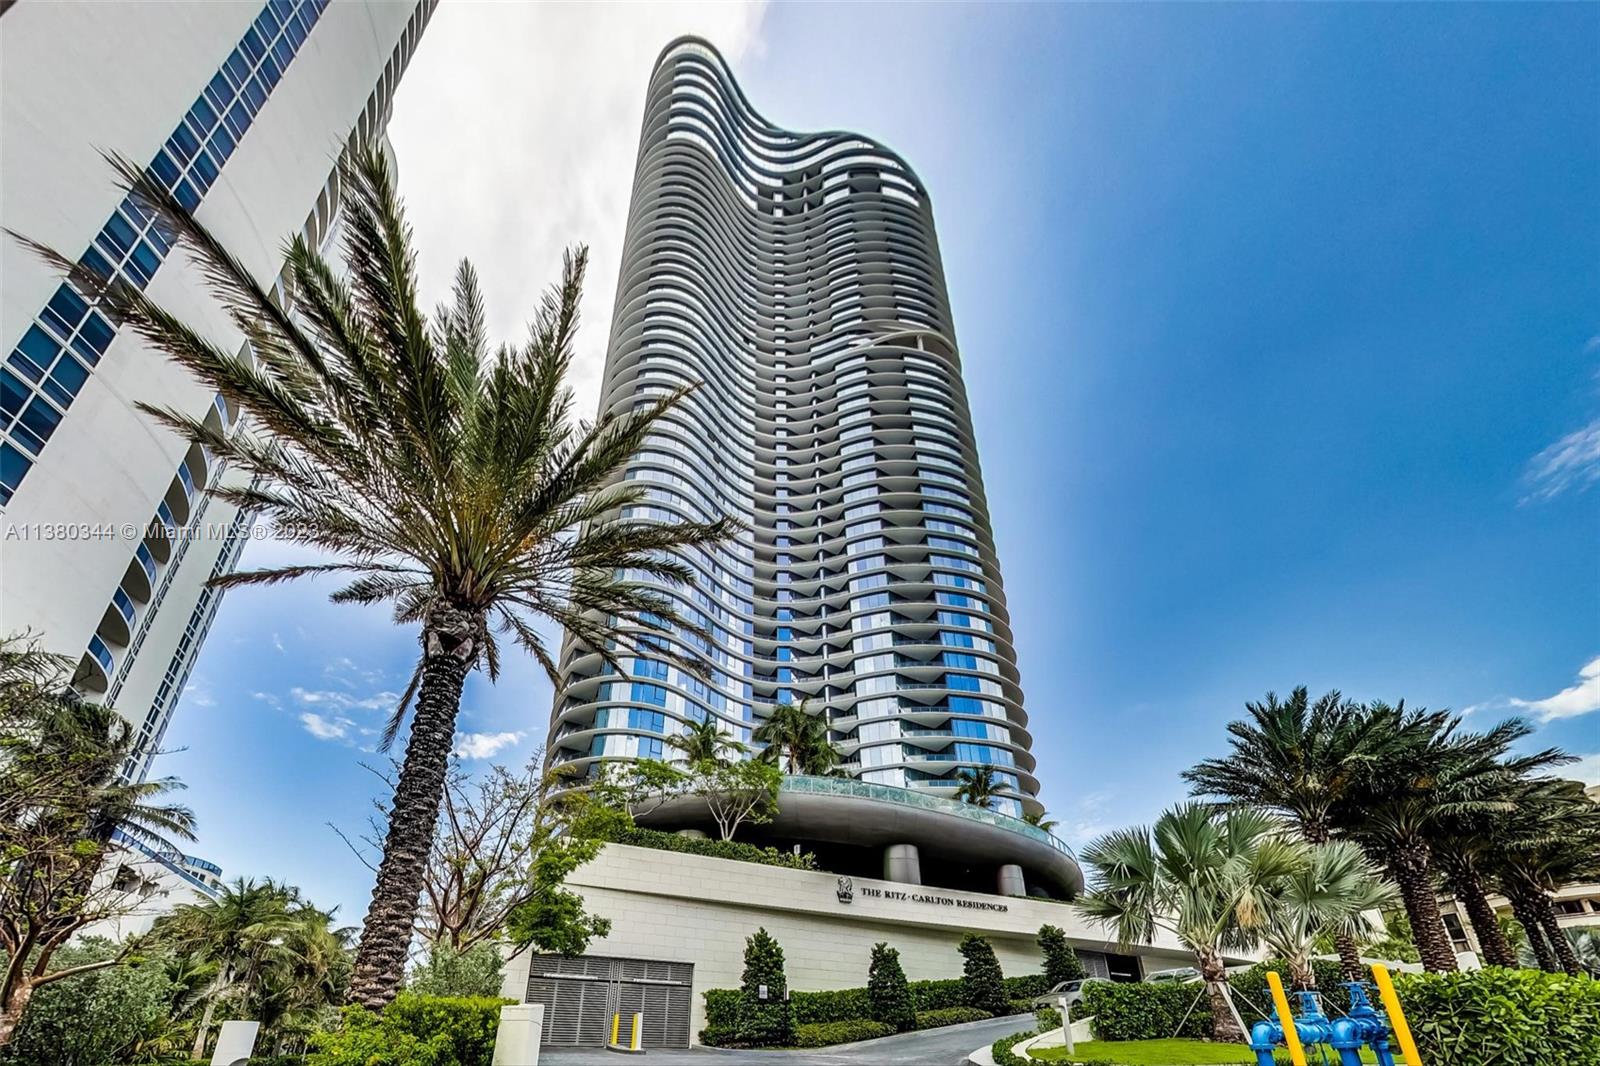 The 5-Star Ritz Carlton Residences in Sunny Isles, Fl brings you this 3/4.5 corner unit w Panoramic Ocean views of the Atlantic ocean and City views of the Intracoastal from all balconies. Newly built in 2020, this luxury unit is ready to enjoy w floor to ceiling High Impact Glass windows. Private Elevator opens up to a spaceous Living room with surrounding water views, Snaidero kitchen and Gaggenau Appliances, Professionally designed and furnished. No expense spared. Private beach with 250 Linear feet of pristine beachfront. S Fla Living at its best for those that expect the Best.